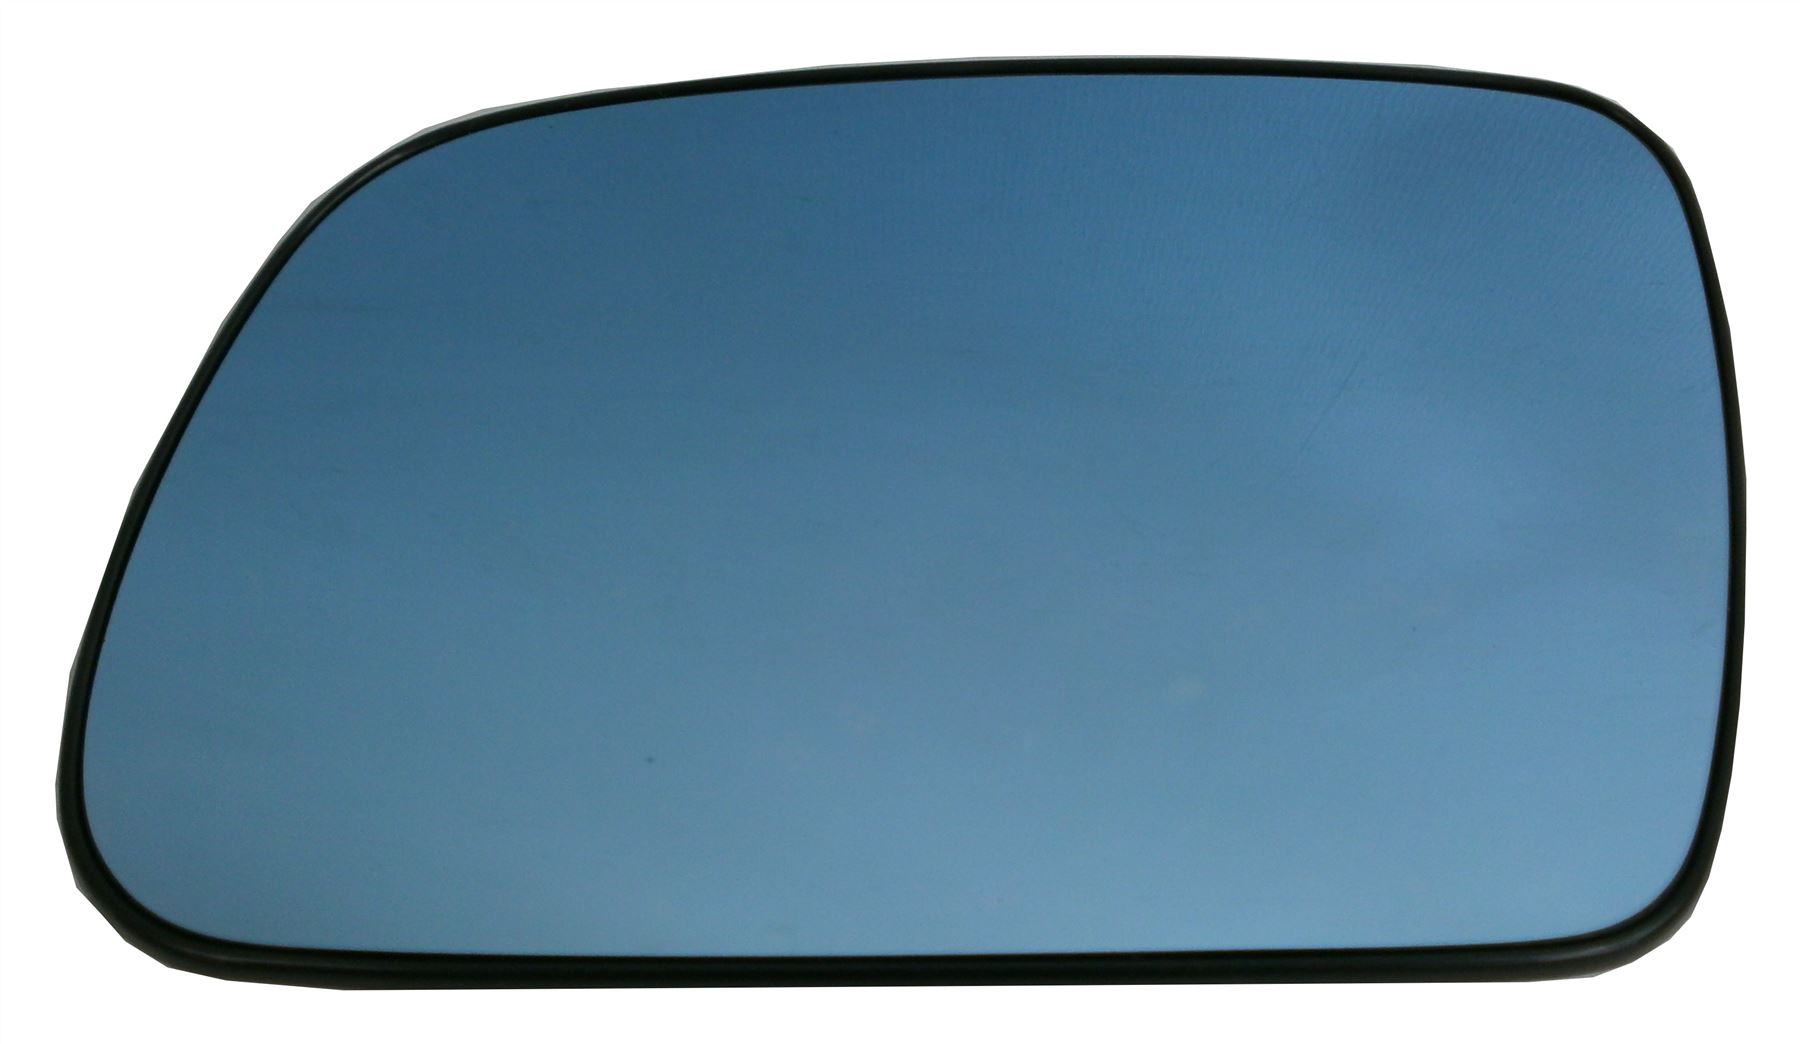 Peugeot 407 2004-2011 Heated Convex Blue Tinted Mirror Glass Passengers Side N/S